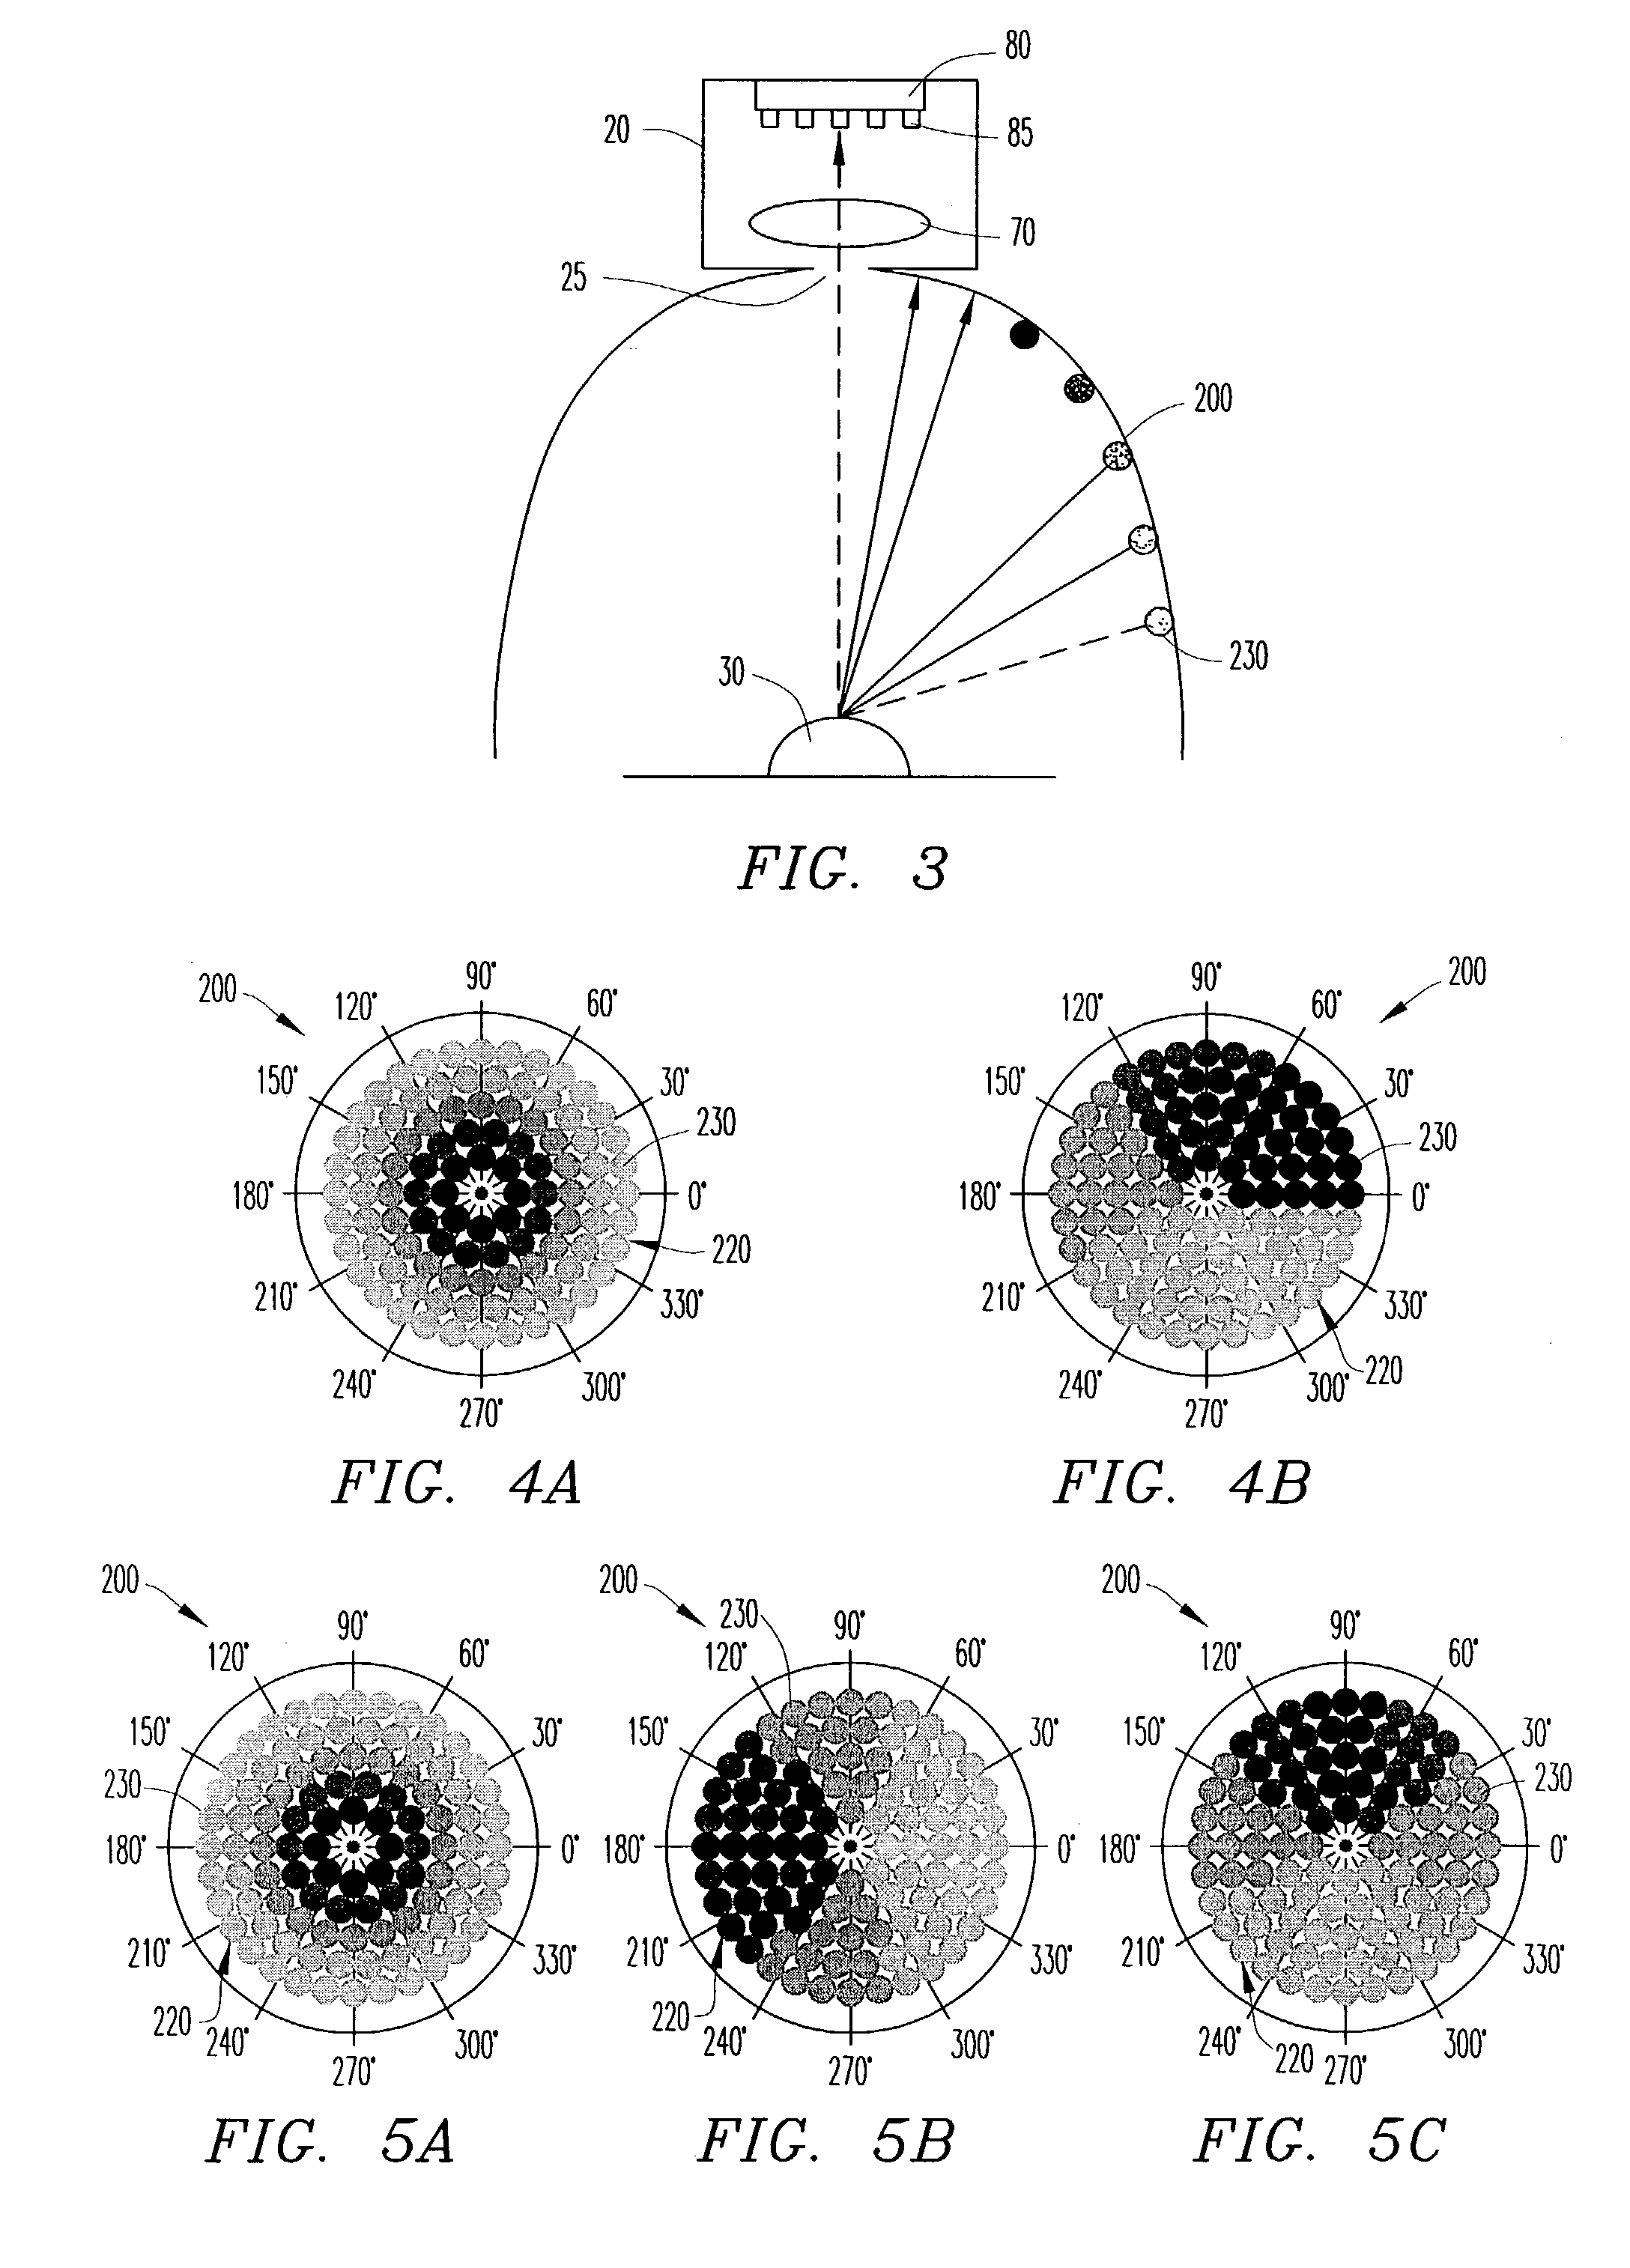 Optical inspection system, illumination apparatus and method for use in imaging specular objects based on illumination gradients